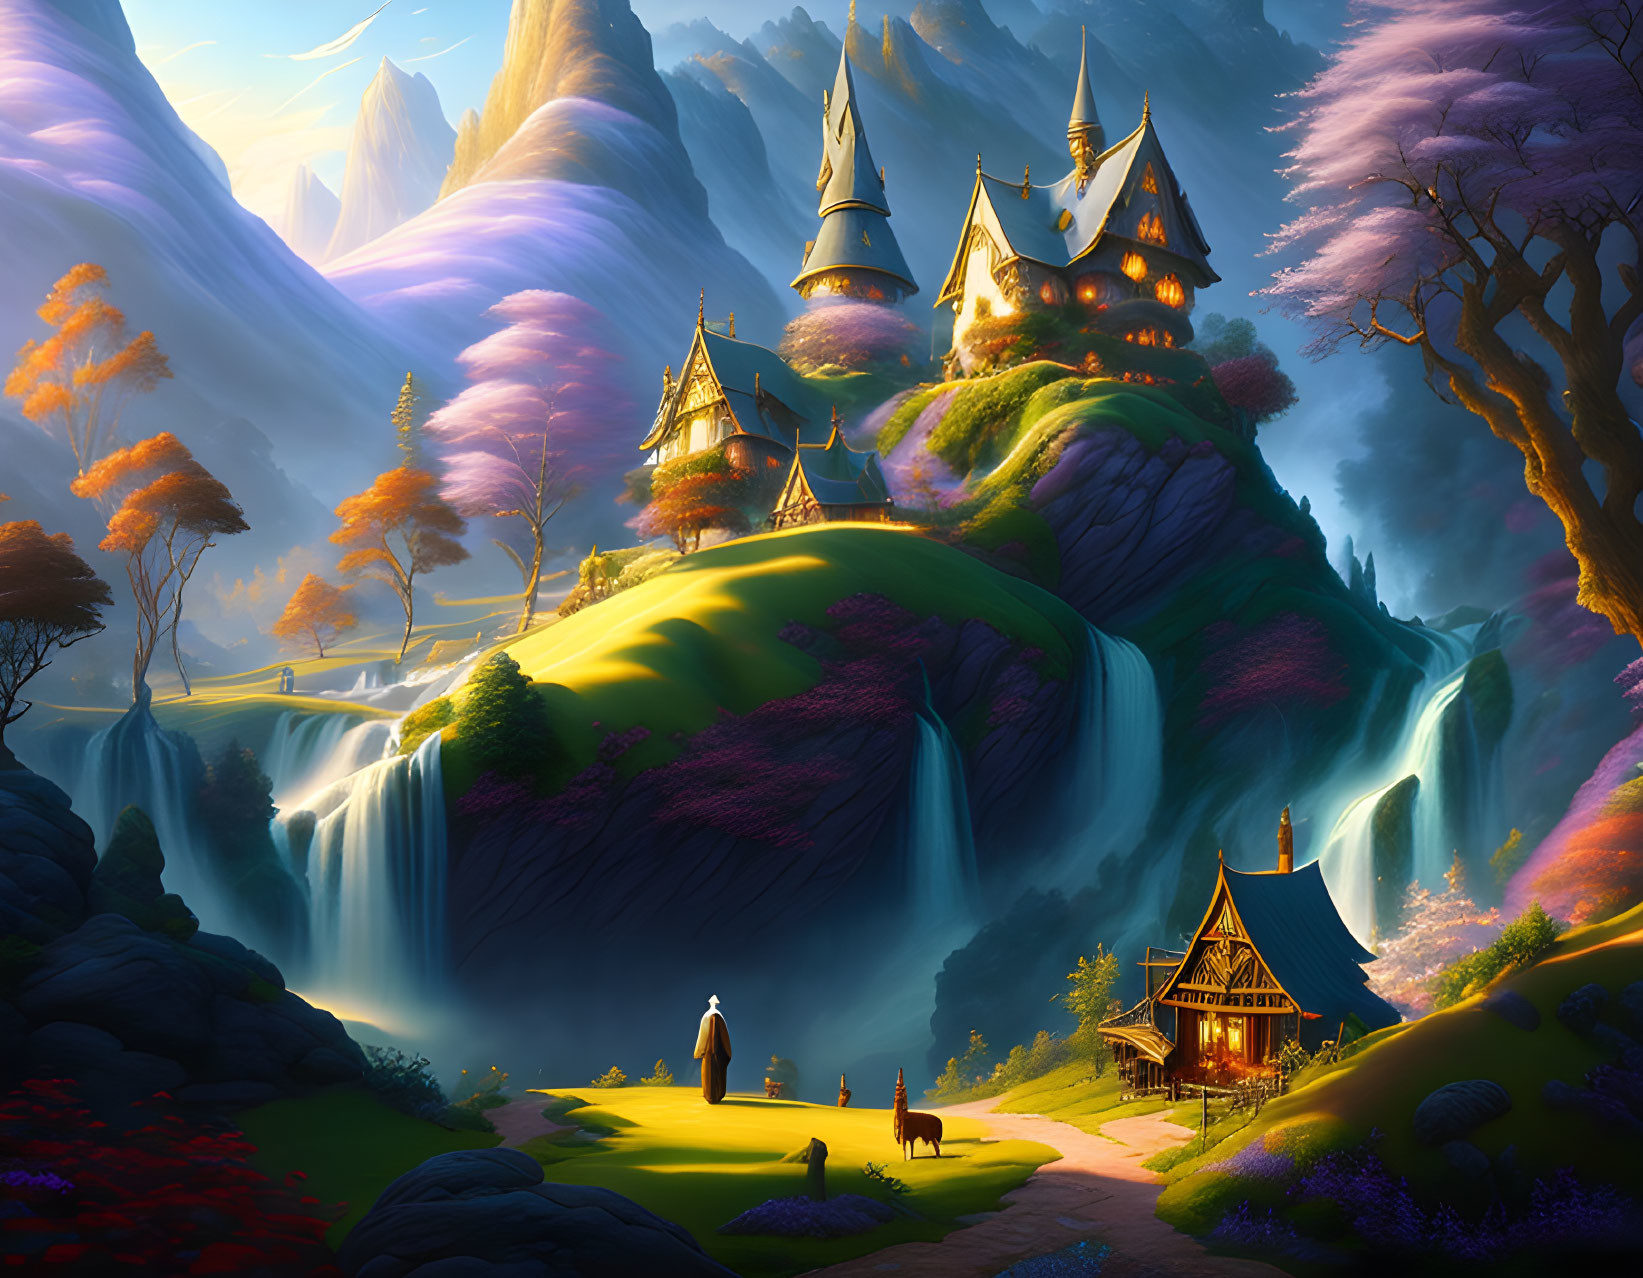 Fantasy landscape with waterfalls, castle, cottage, and twilight scene